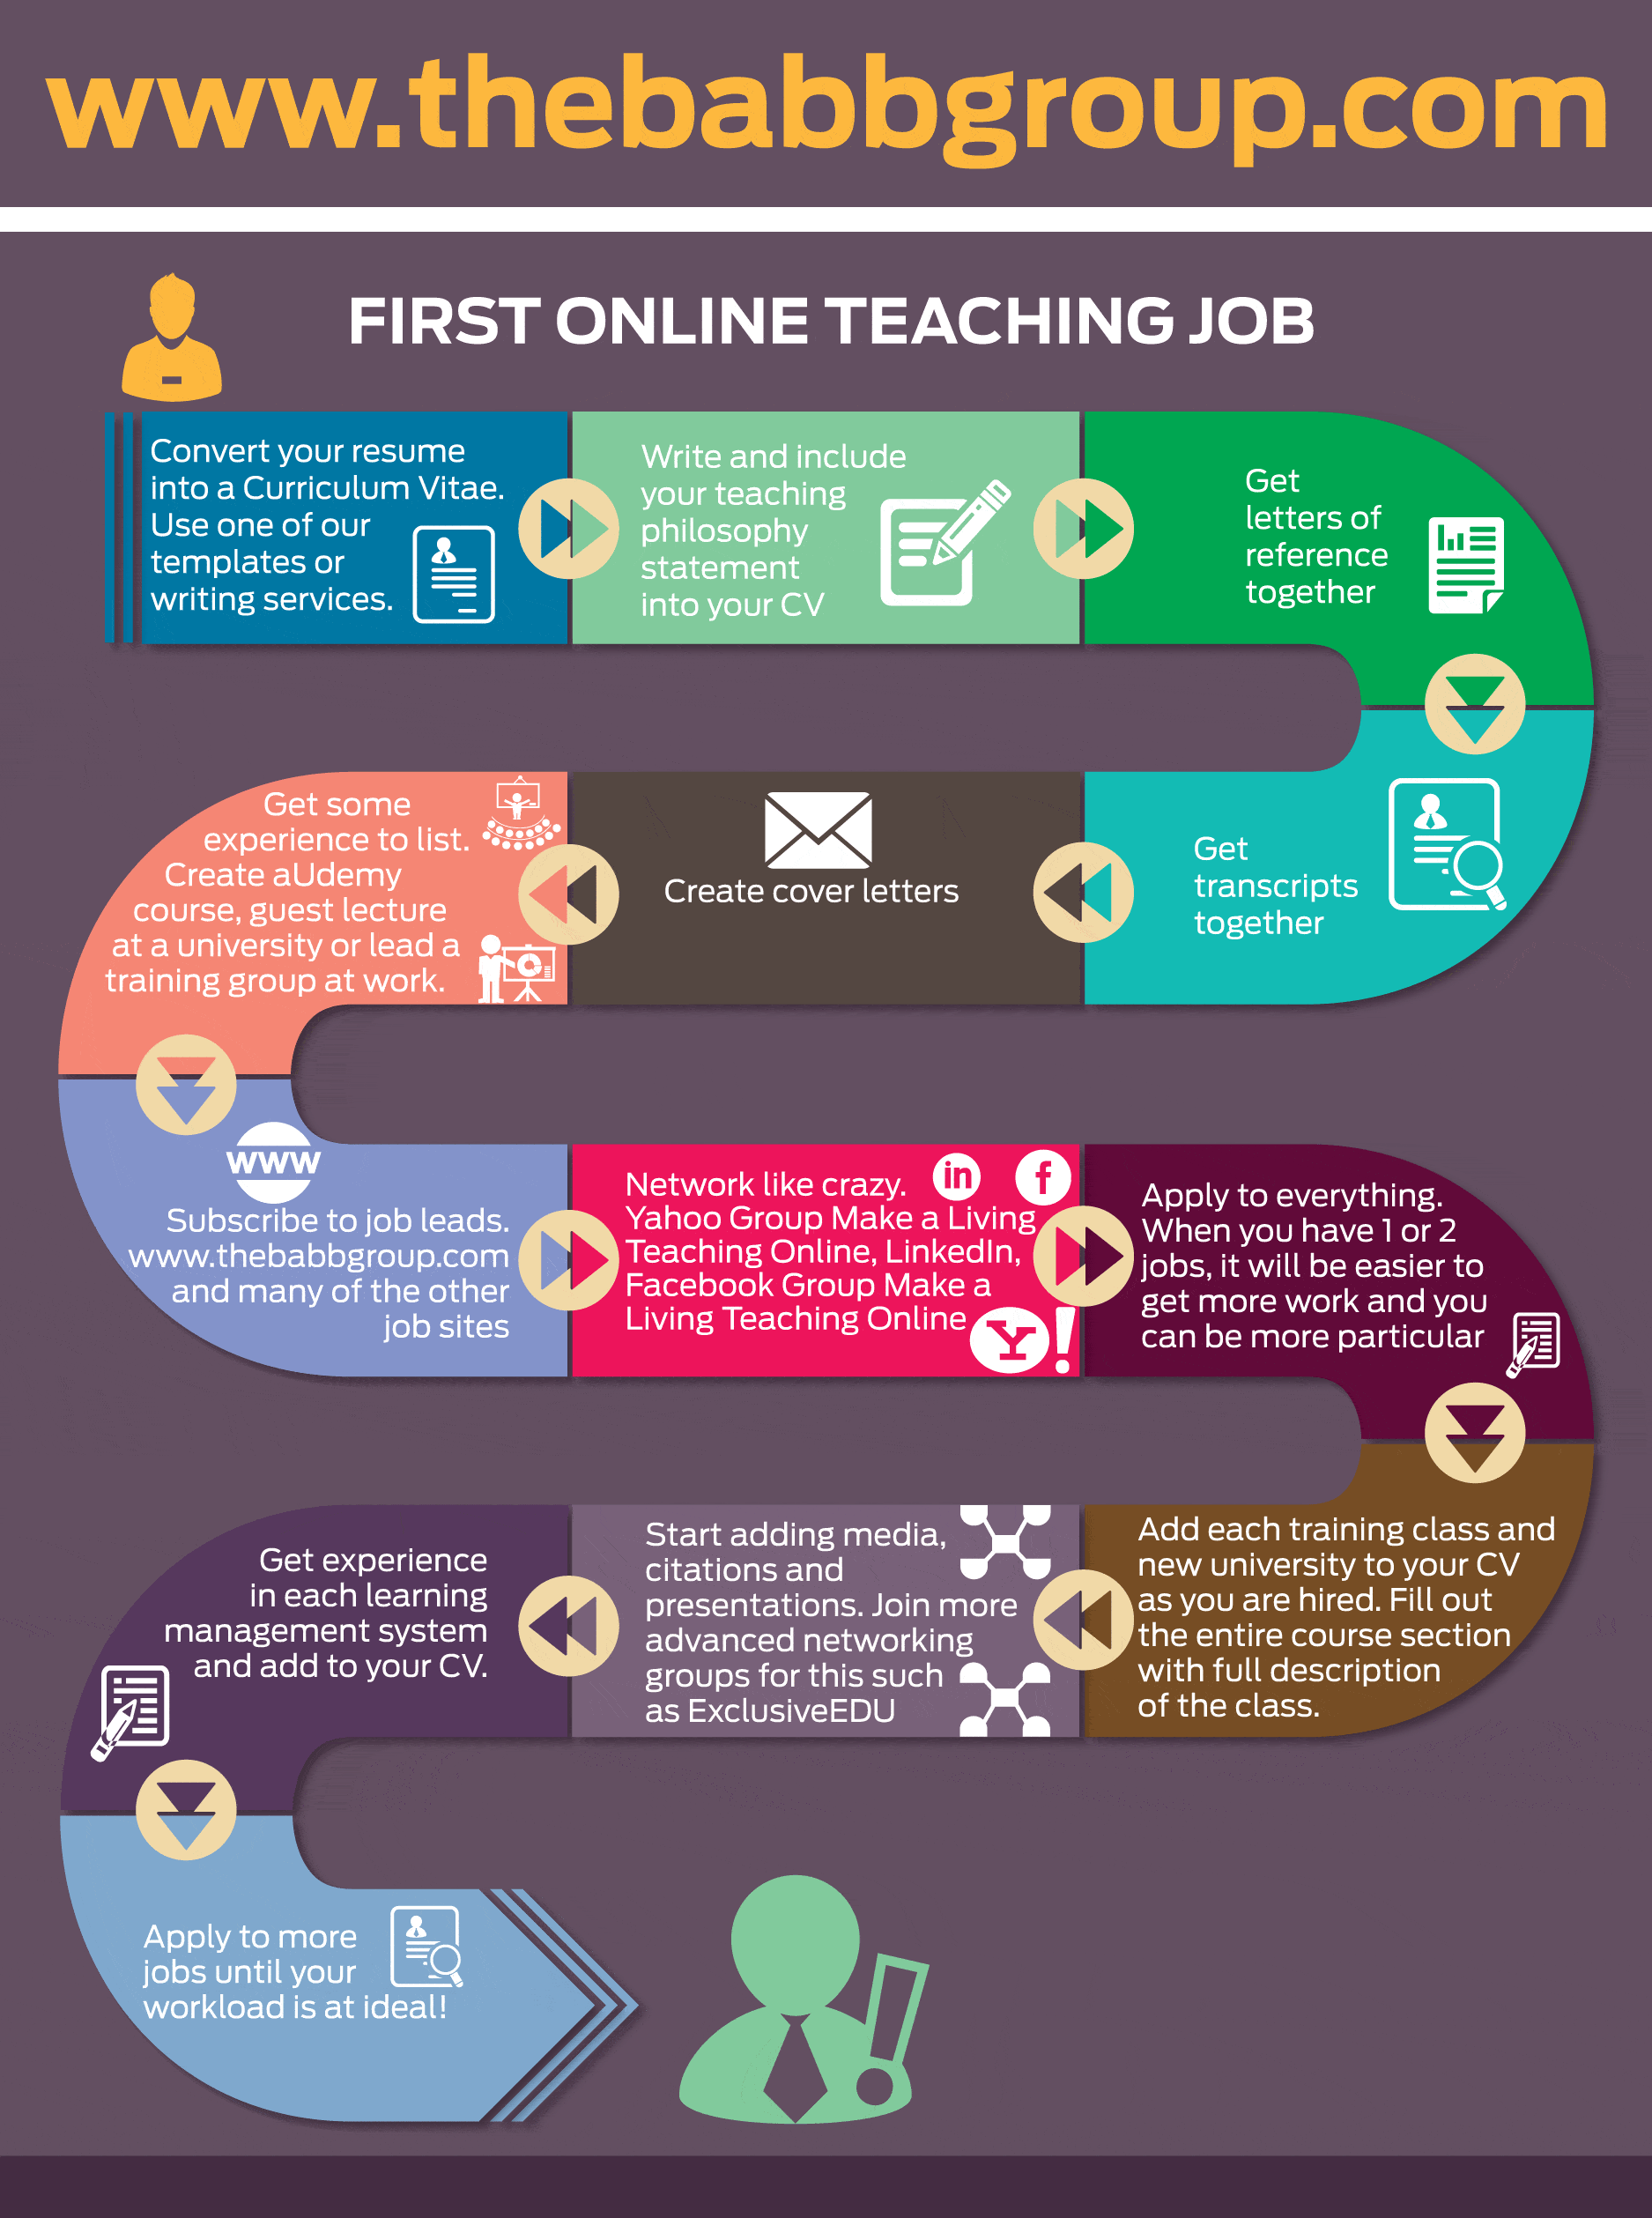 How to Get Your First Online Teaching Job Infographic